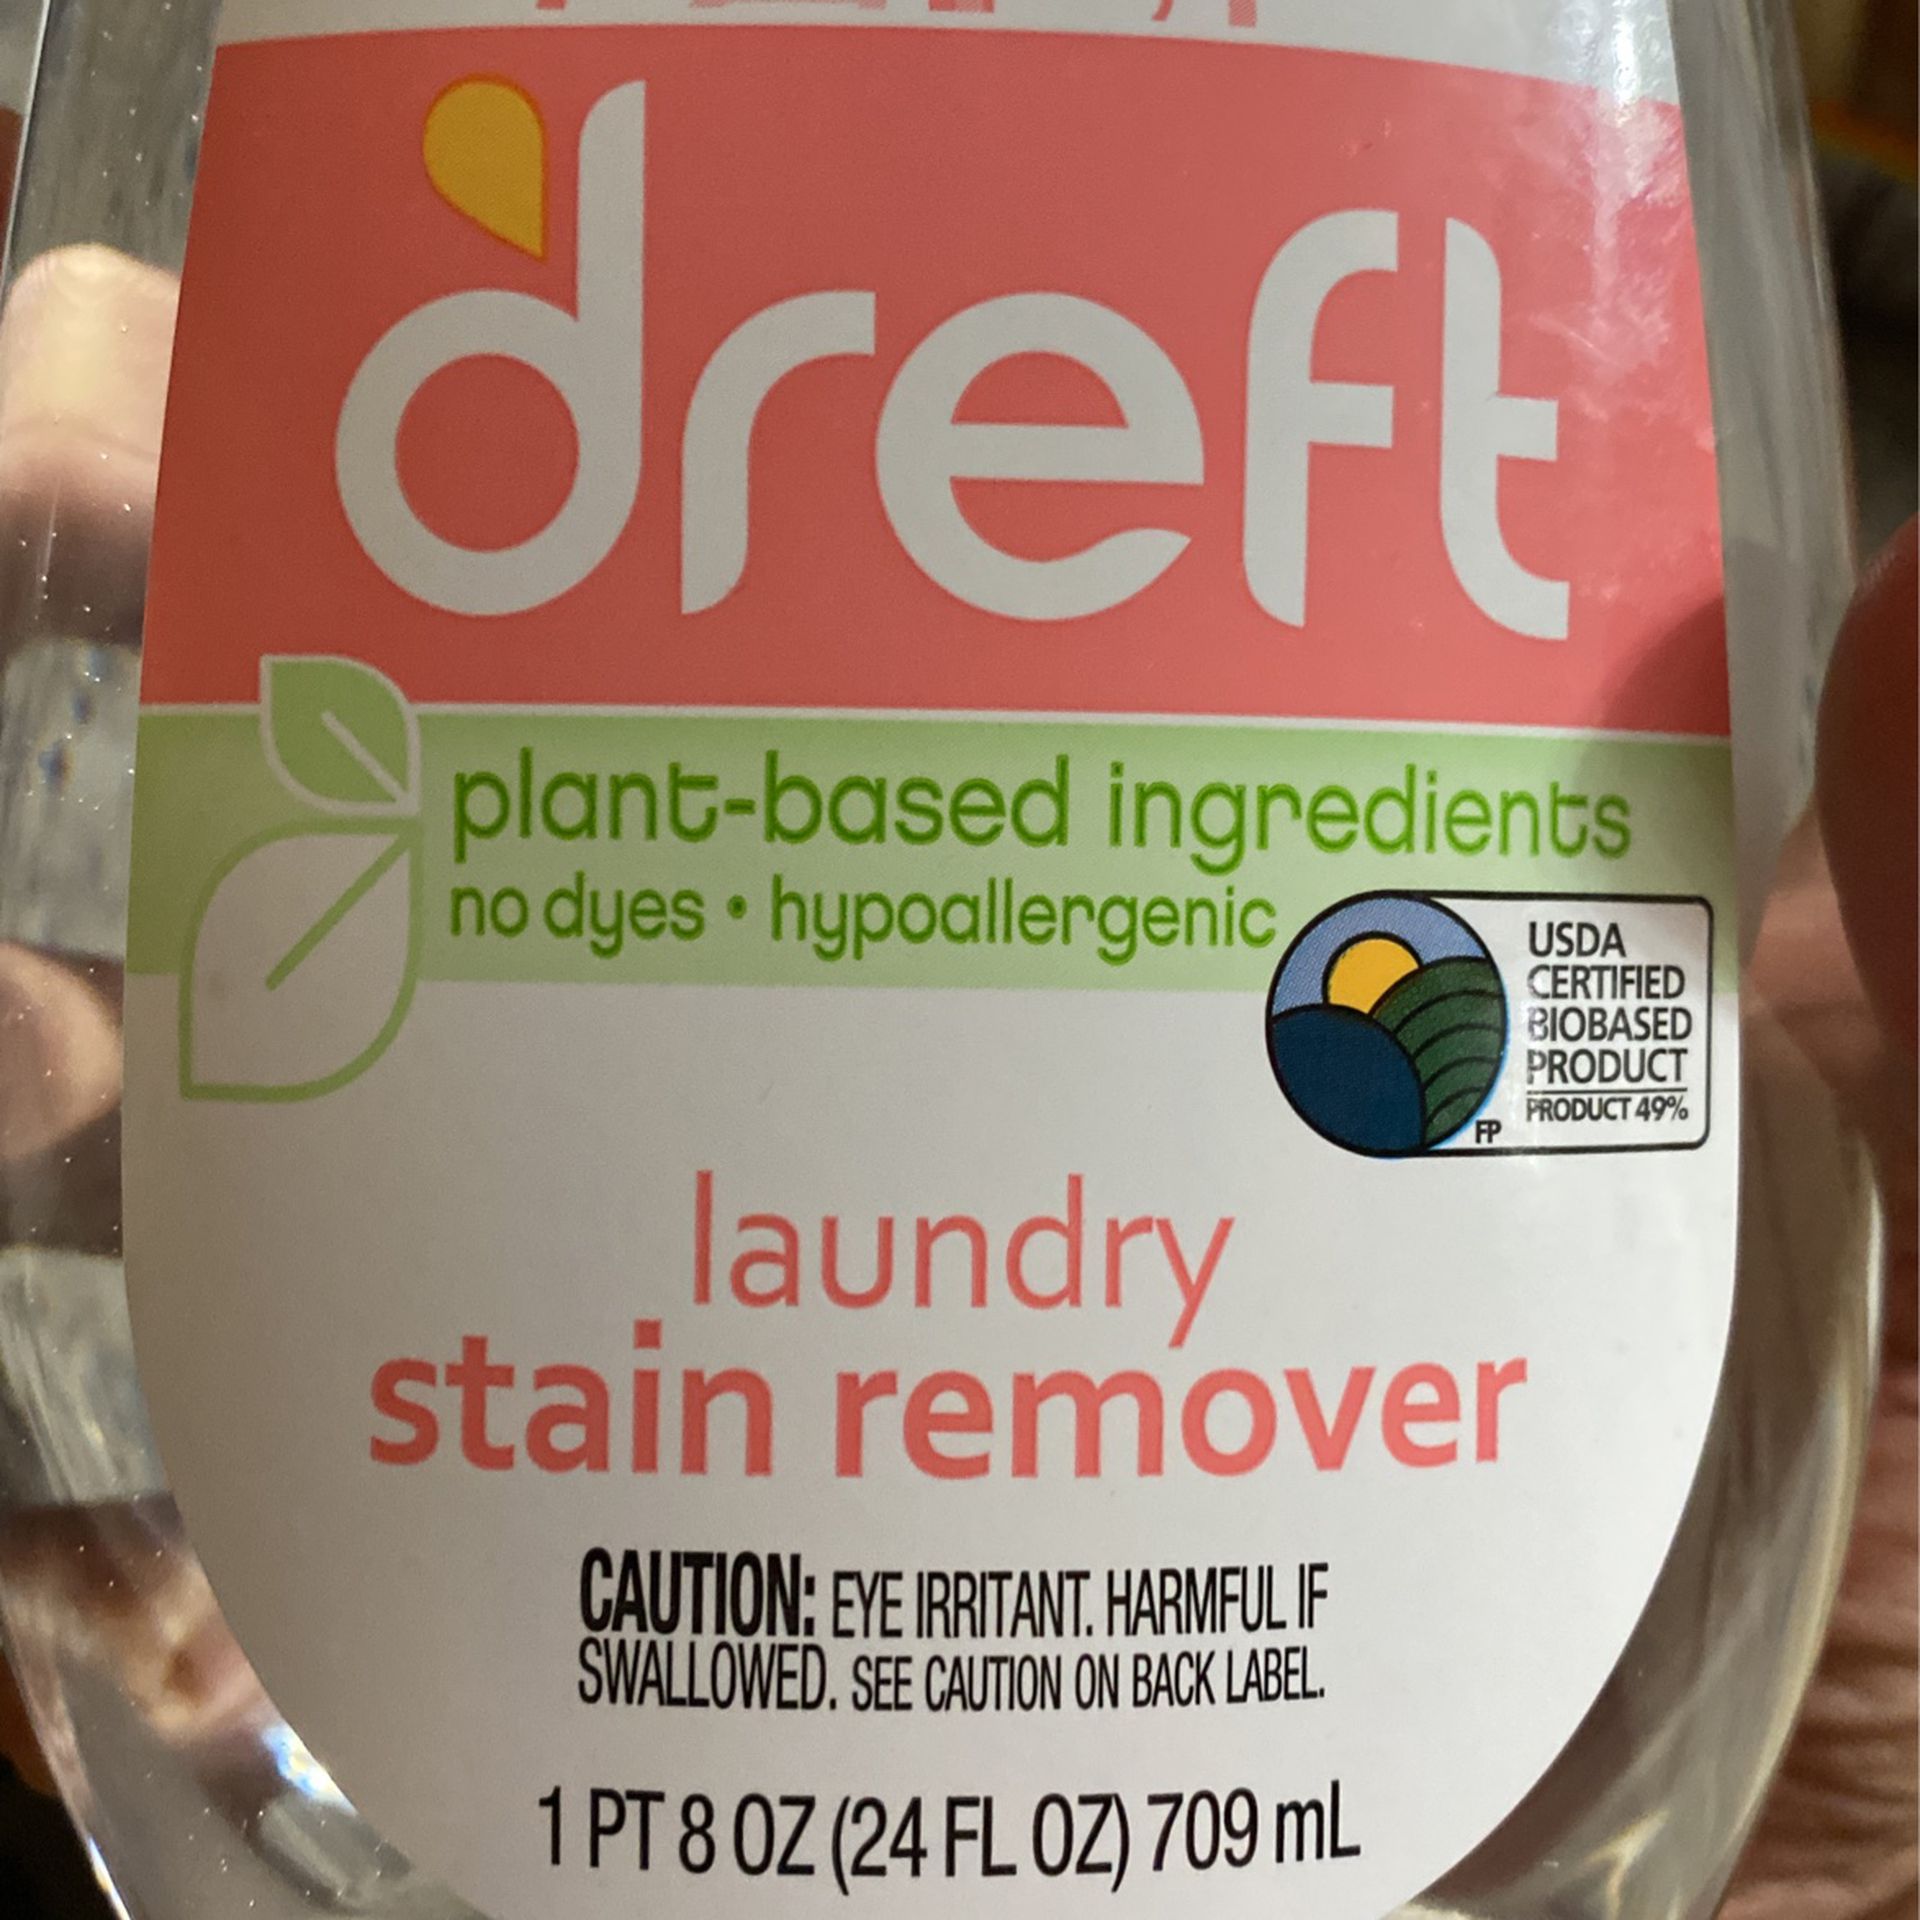 Dreft Stain Remover For Baby Clothes